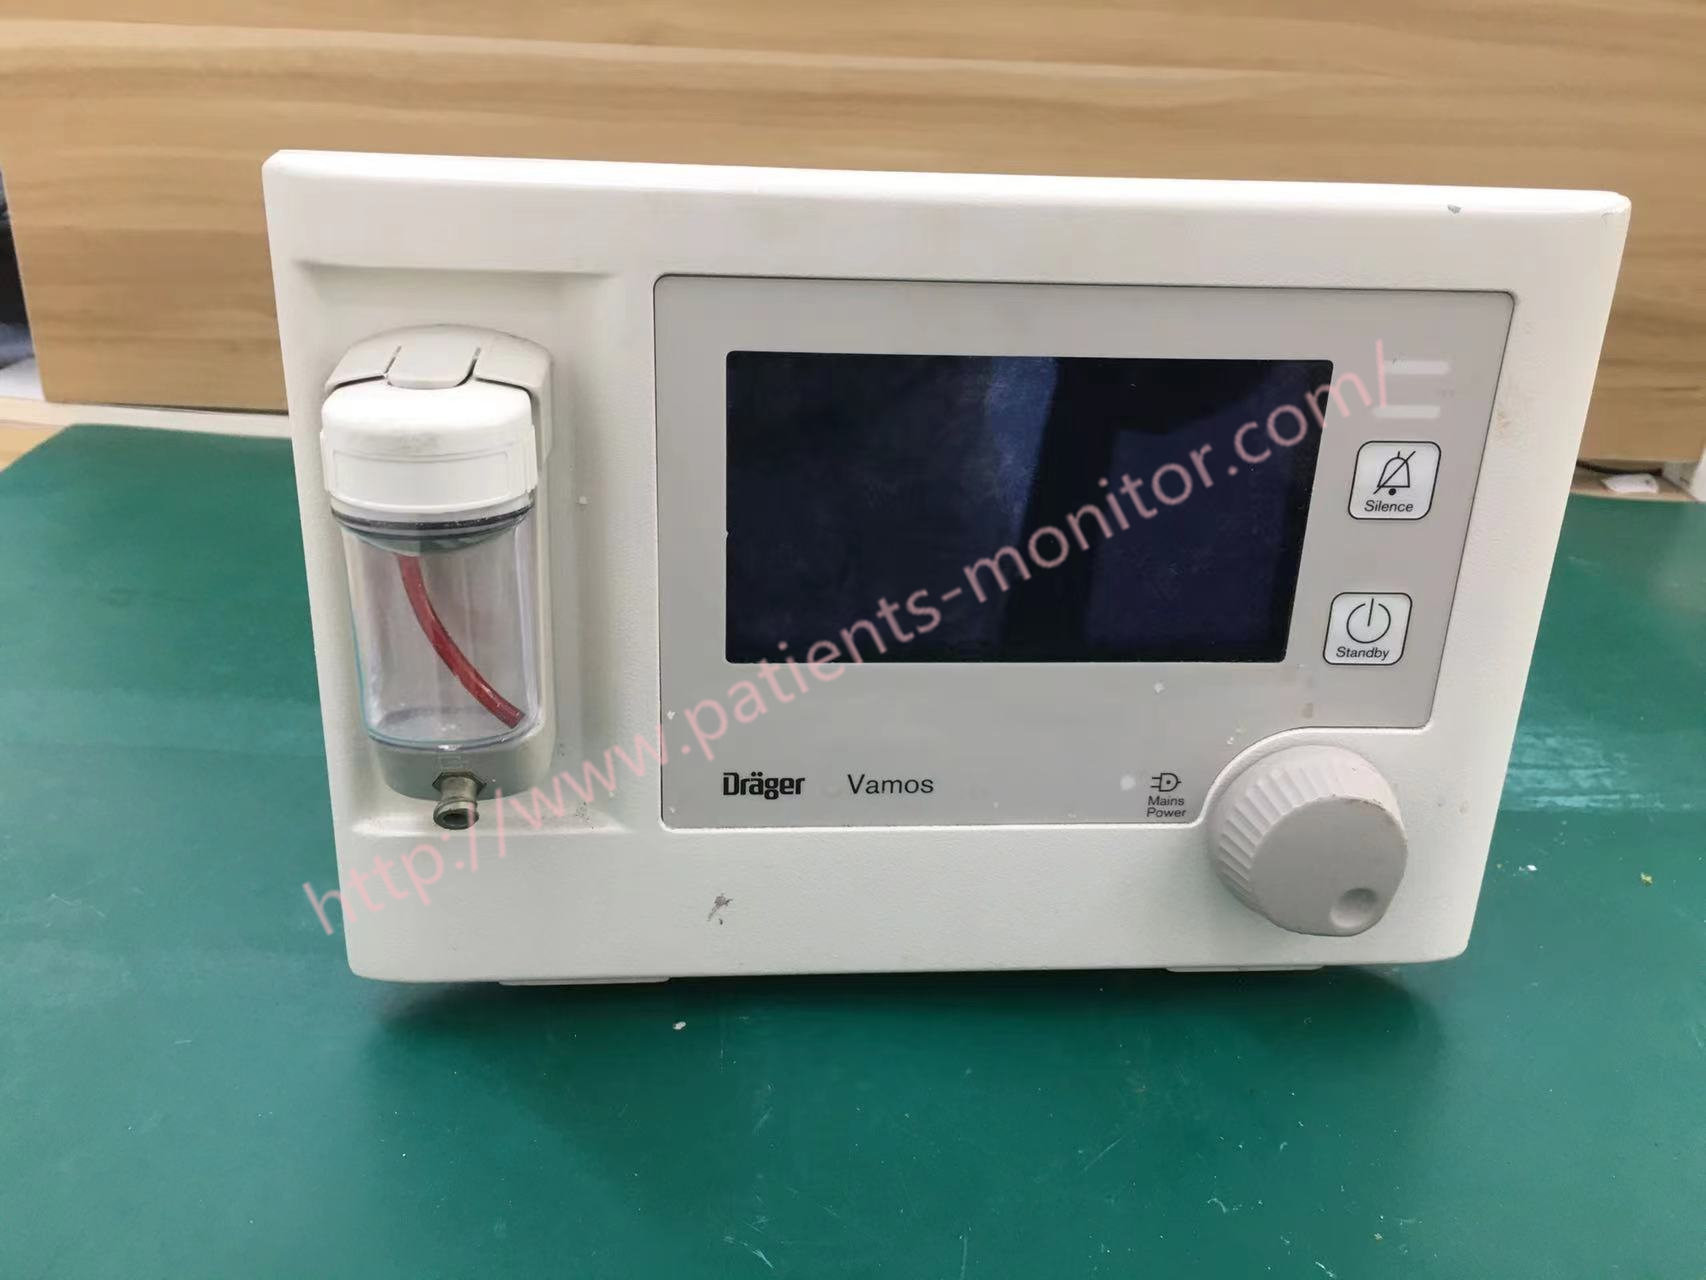  Ref EF6870750-33  Drager  Vamos  Anesthesia  Gas  Monitor   Used Manufactures